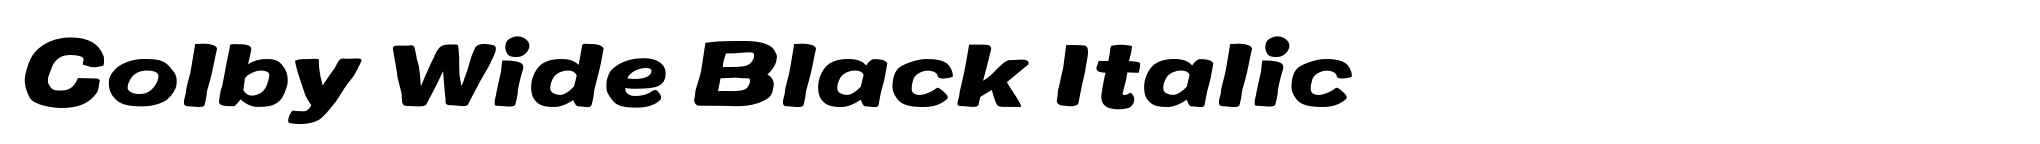 Colby Wide Black Italic image